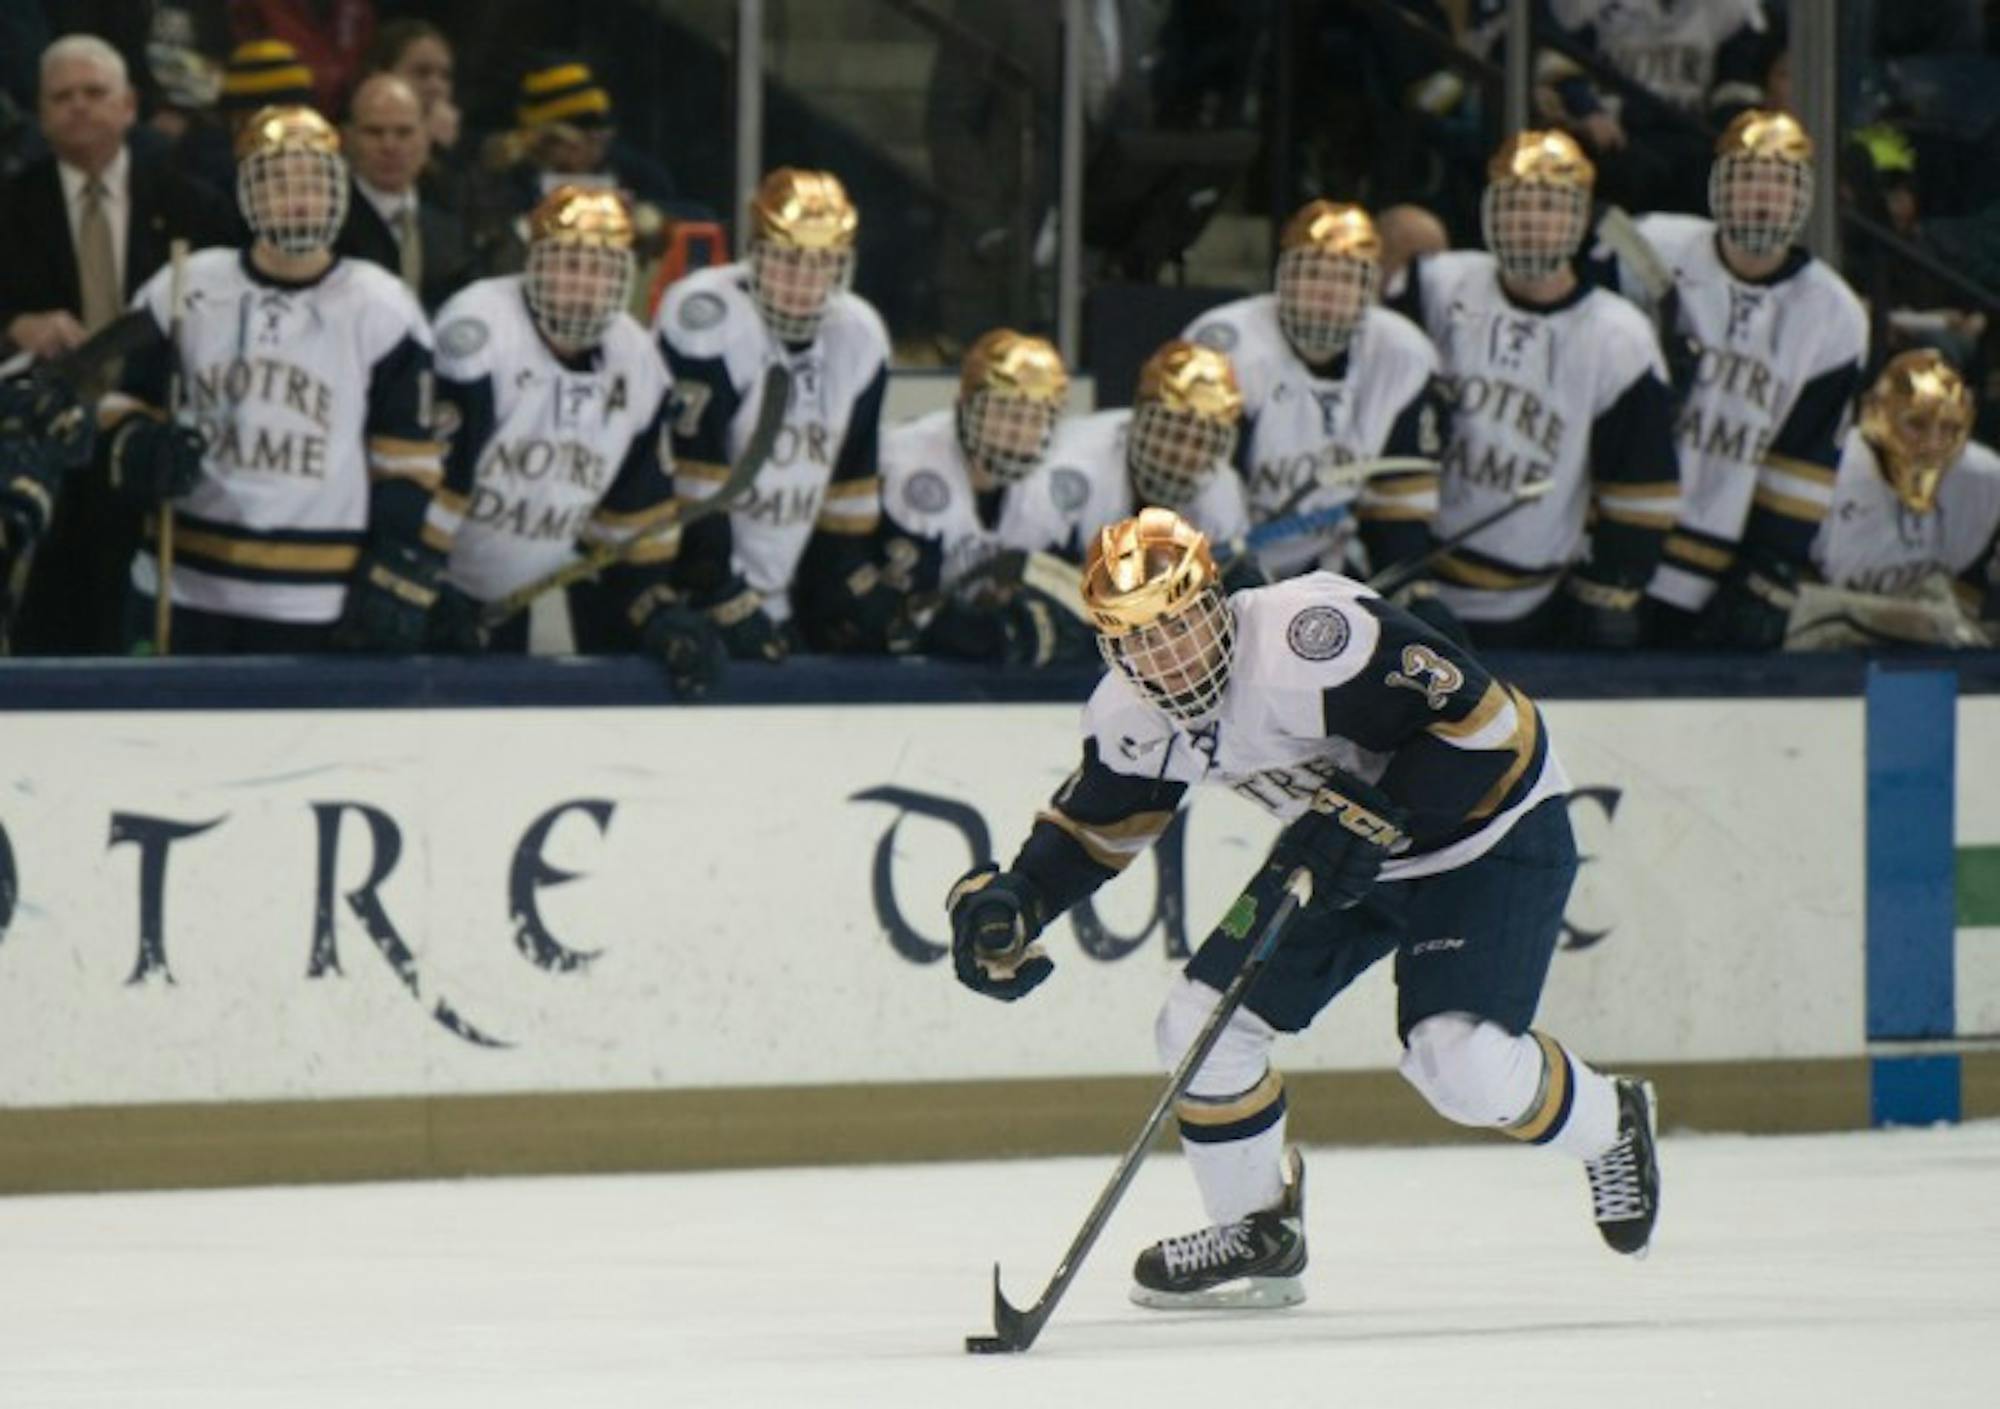 Notre Dame sophomore center Vince Hinostroza handles the puck in a 3-3 tie with Connecticut on Jan. 16.